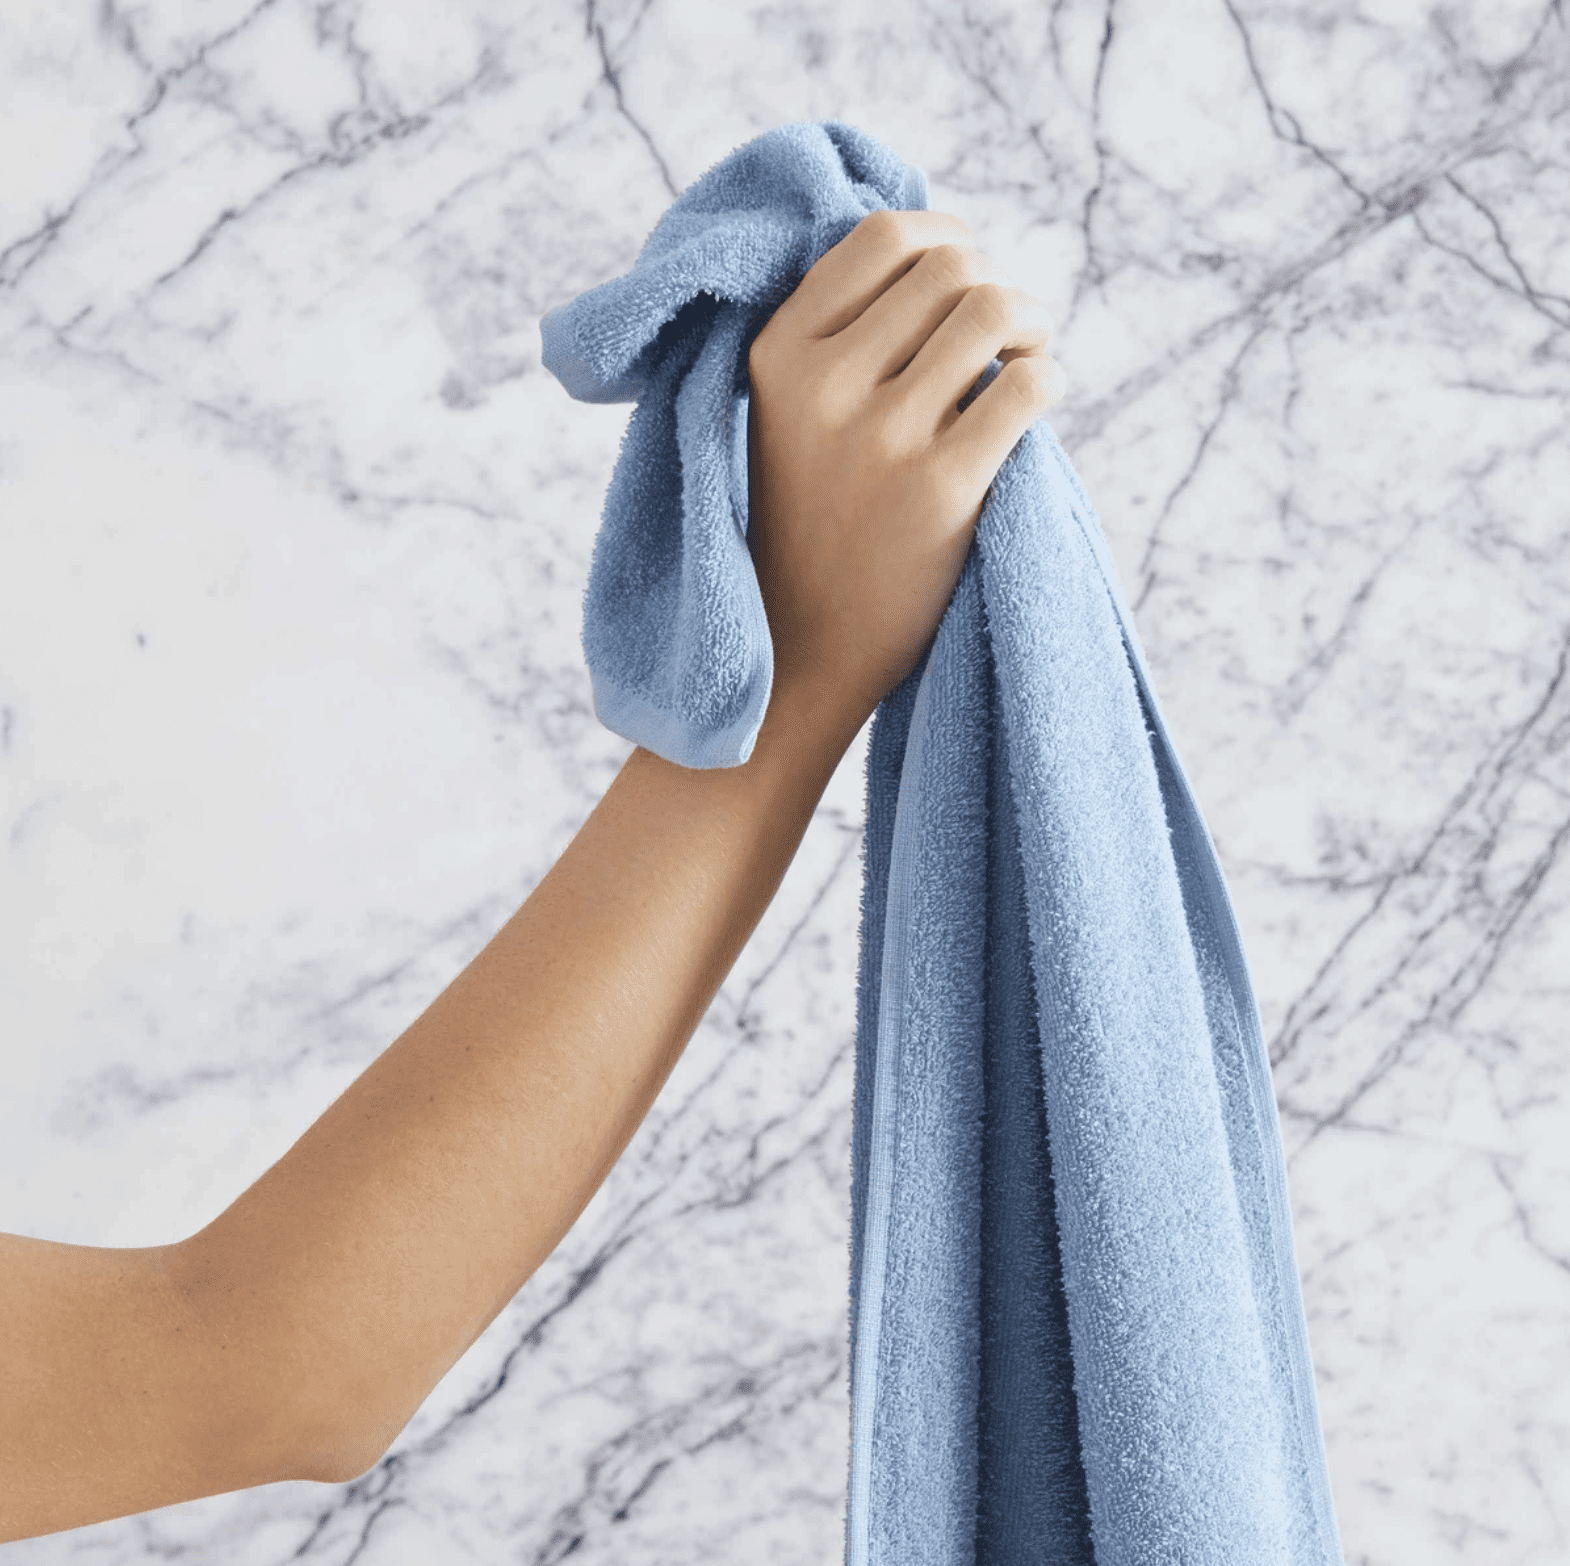 The Best Bath Towels For Your Face And Body